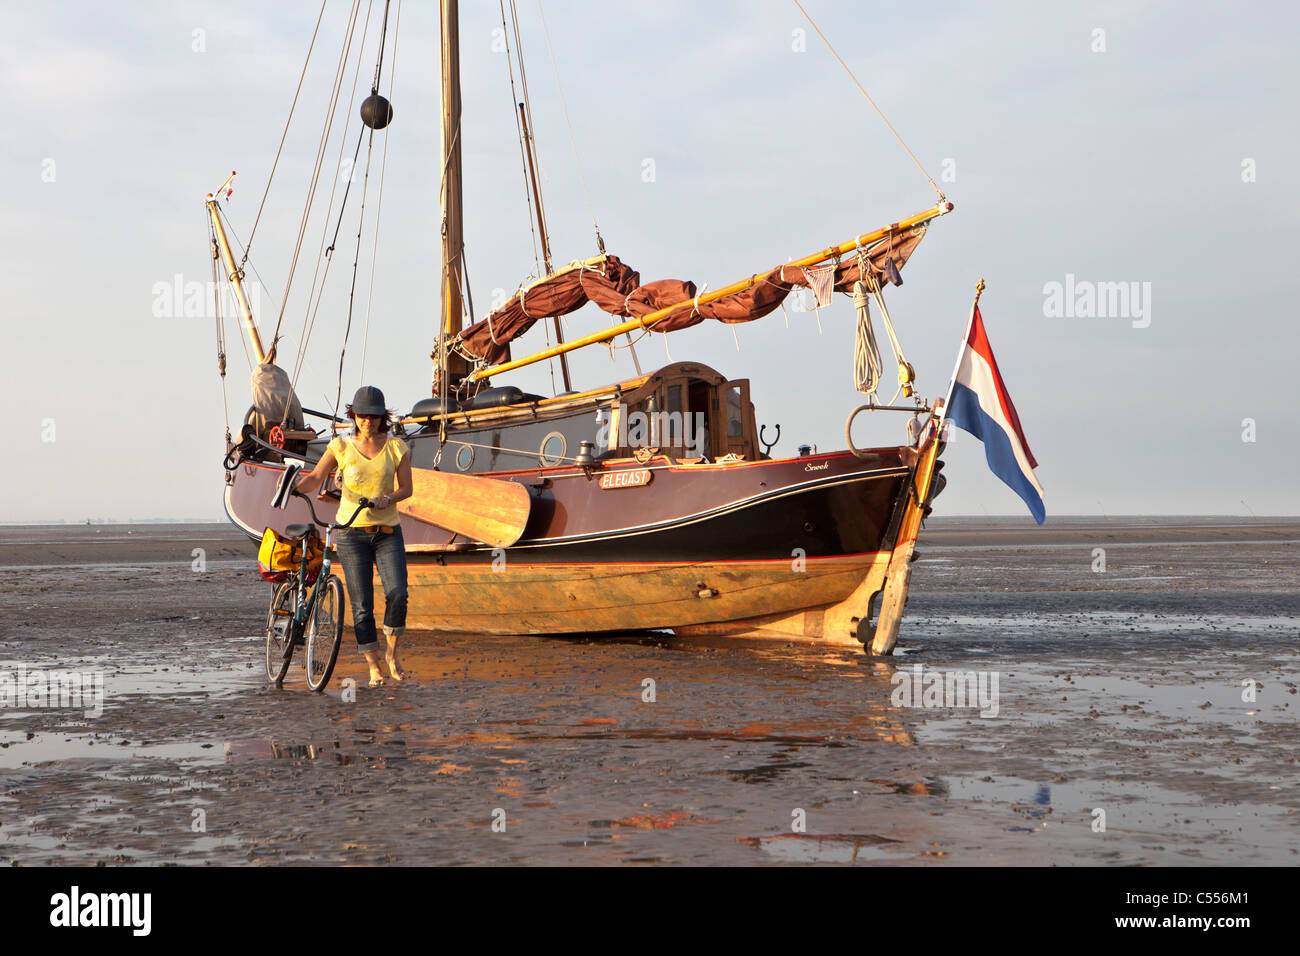 The Netherlands, Nes, Ameland Island, belonging to Wadden Sea Islands. Sailing boat on mud flat in harbour. Woman and bicycle. Stock Photo